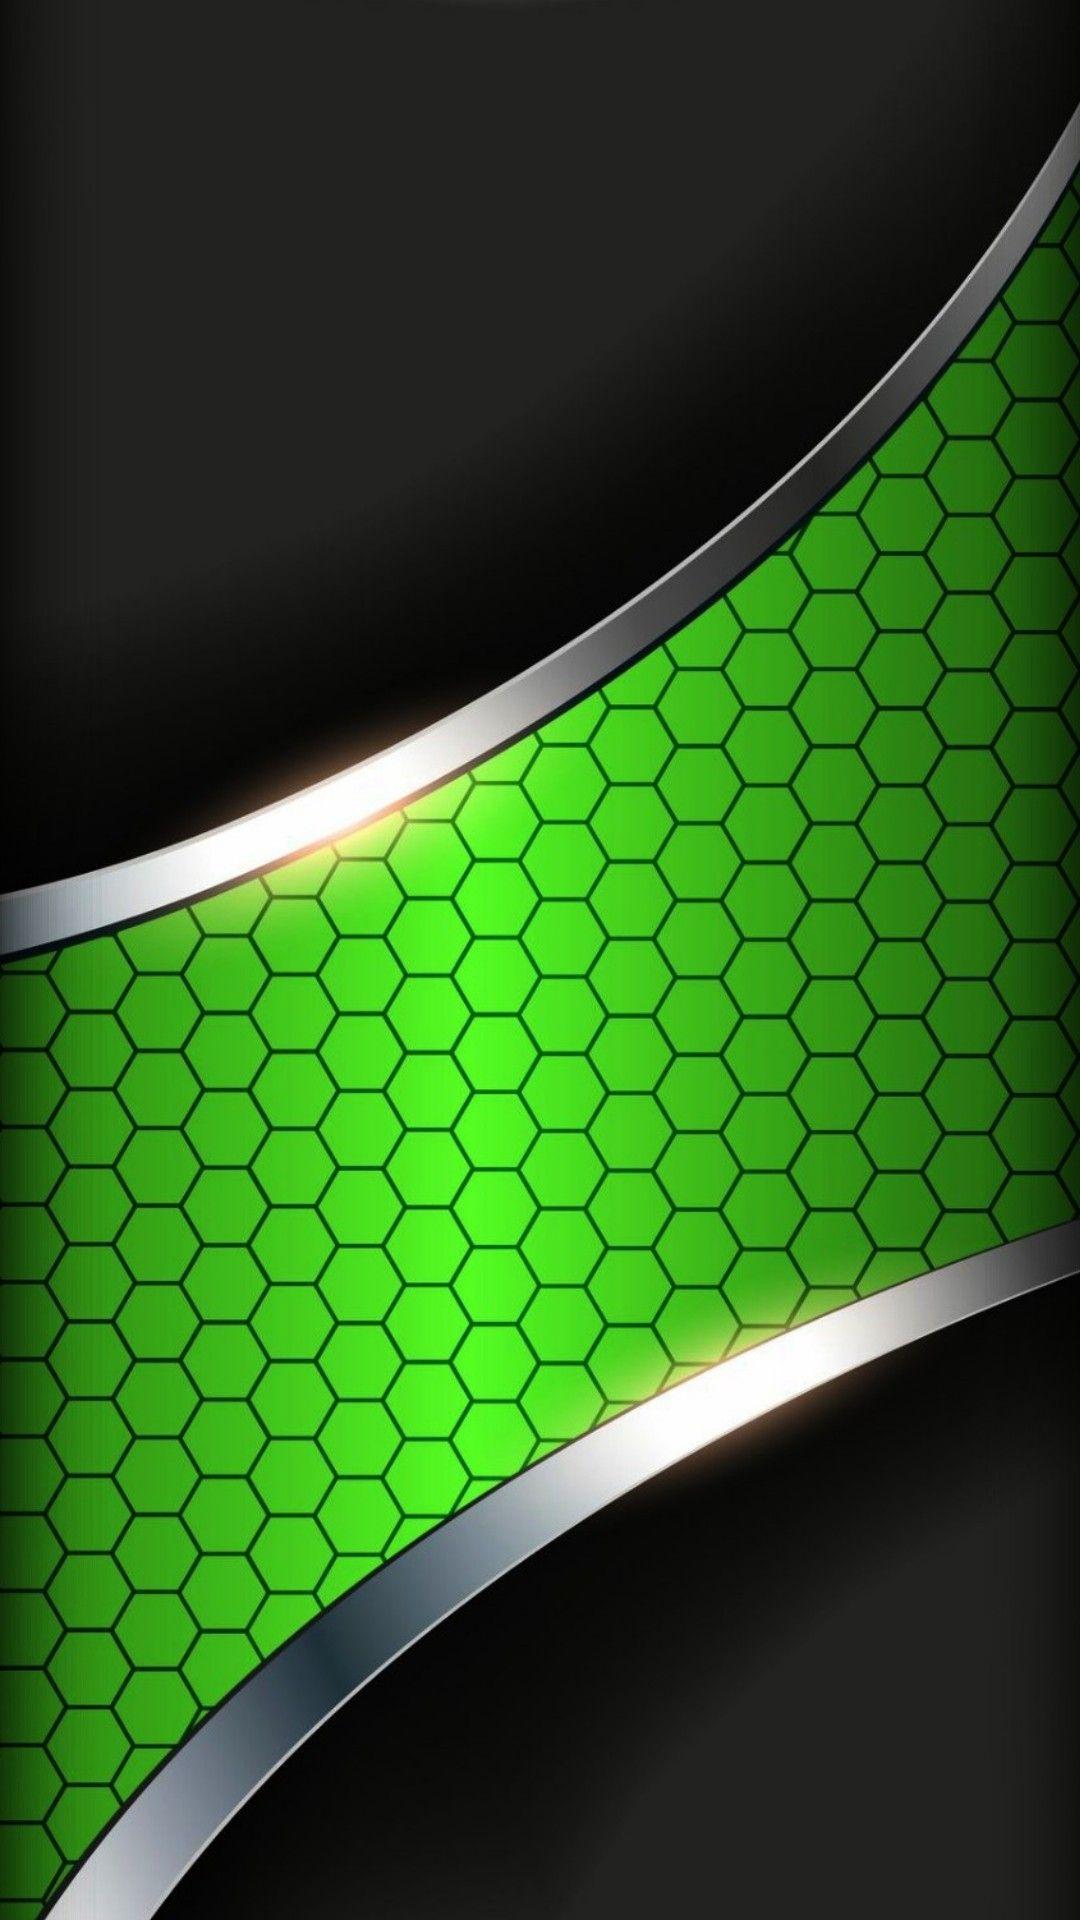 Wired Green. Android Wallpaper I use on my Samsung Luna older 2016